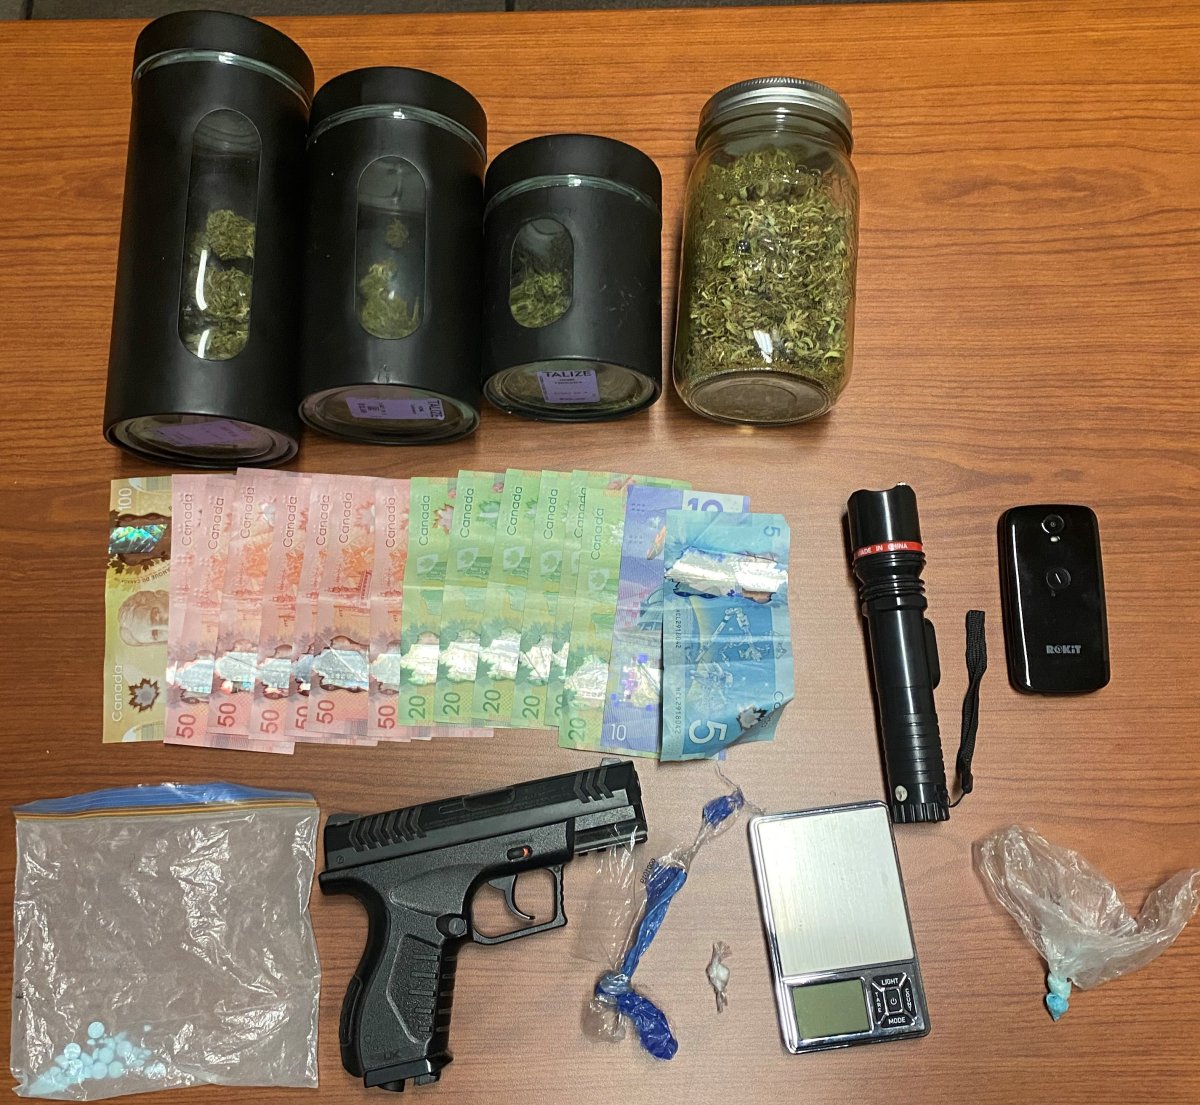 Drugs and weapons were seized in Peterborough during a traffic stop by OPP.